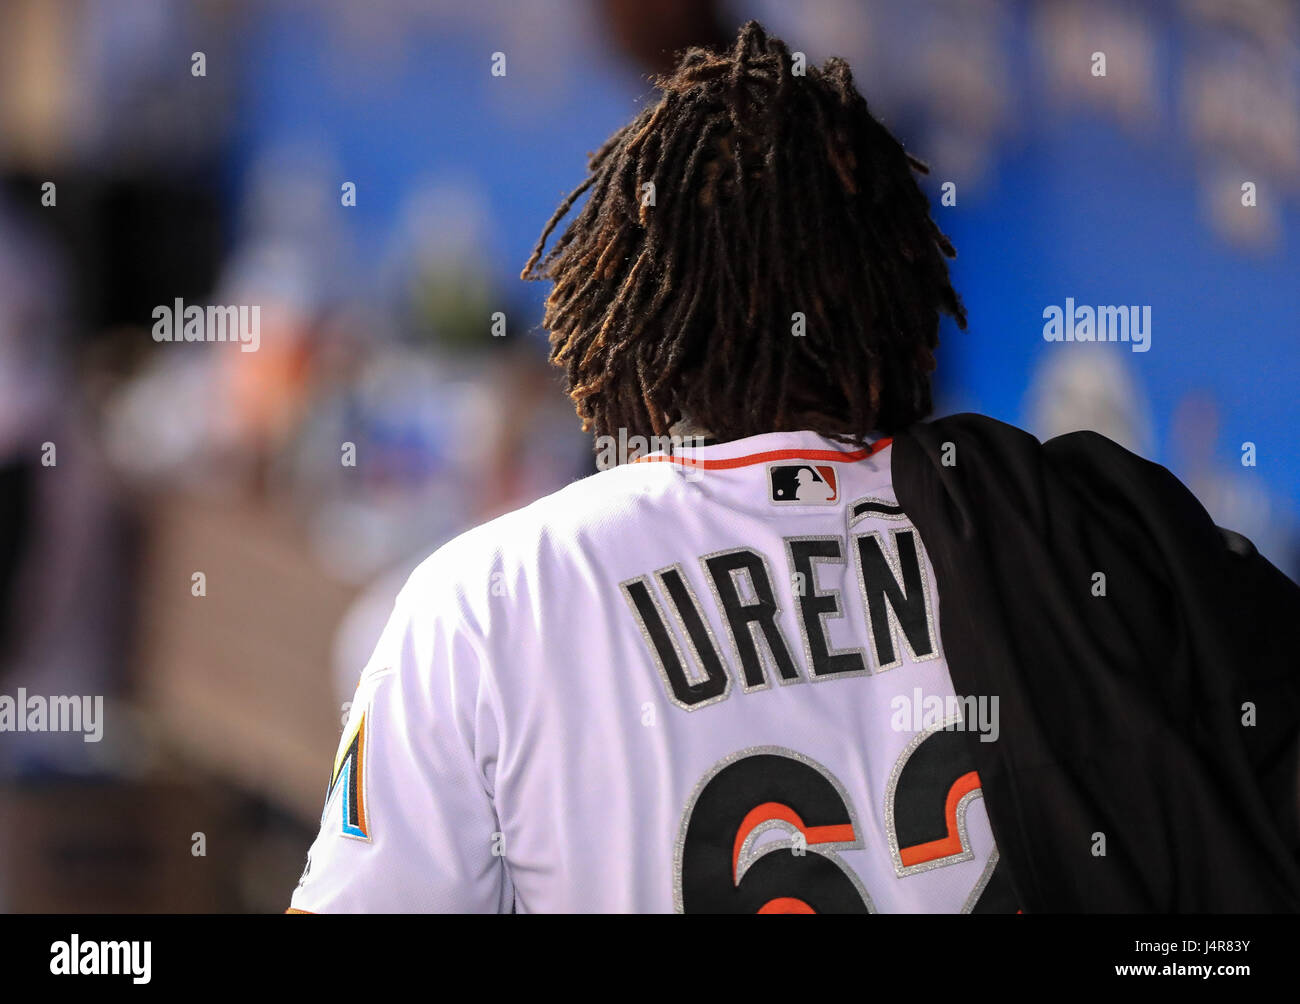 Miami, Florida, USA. 12th May, 2017. Miami Marlins opening pitcher Jose Urena (62) in the dugout during the MLB game between the Atlanta Braves and the Miami Marlins at the Marlins Park, in Miami, Florida. The Braves defeated the Marlins 8-4. Mario Houben/CSM/Alamy Live News Stock Photo